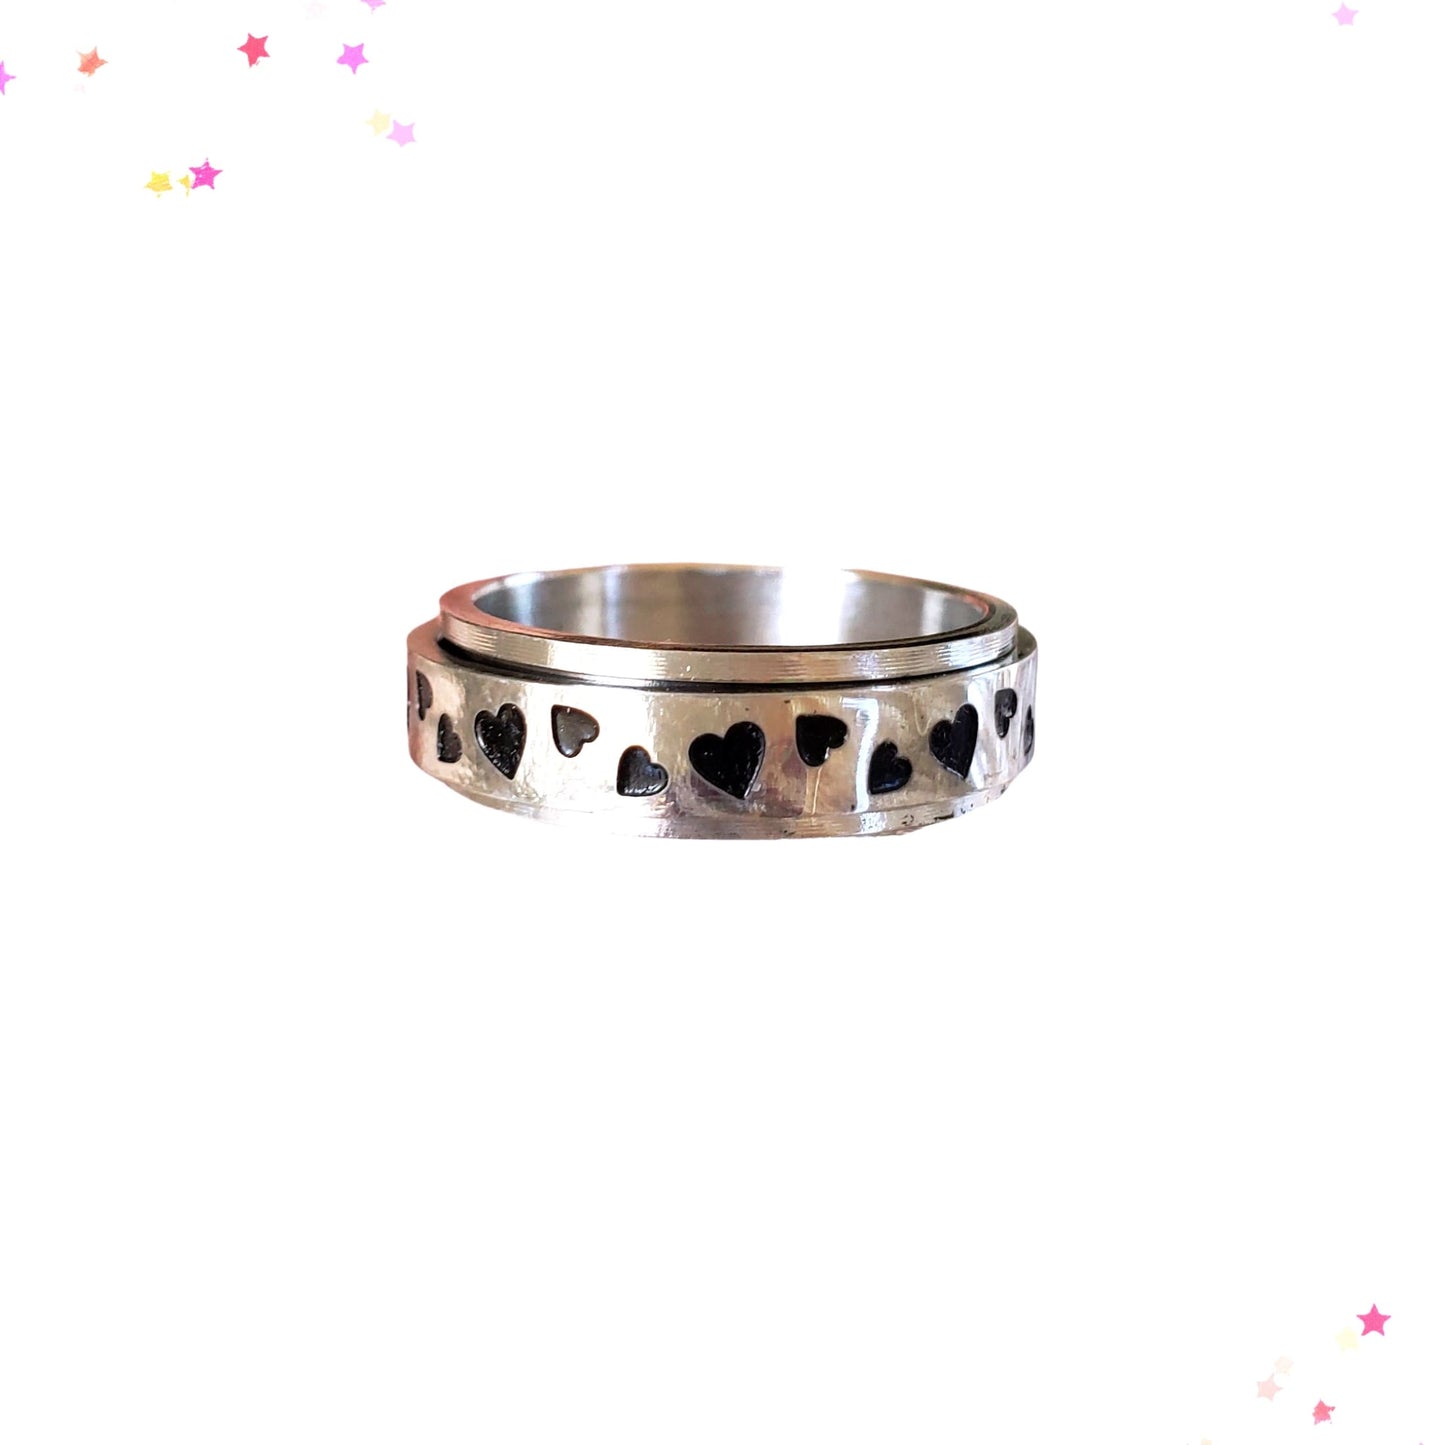 Stainless Steel Rotating Spin Ring with Hearts from Confetti Kitty, Only 7.99